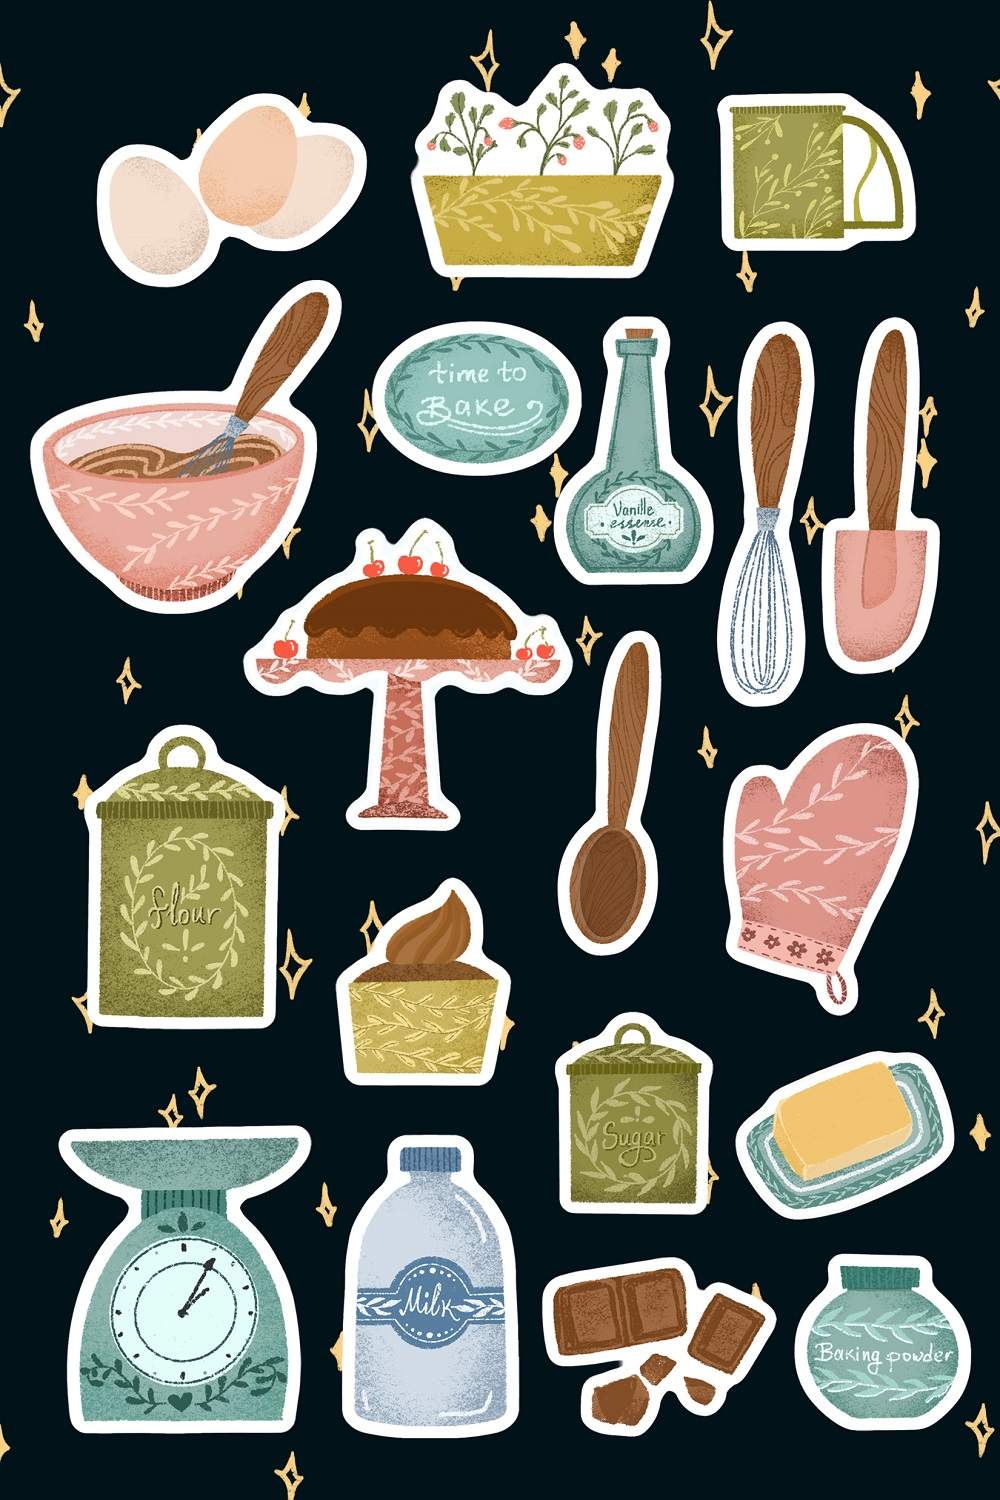 Home bake sticker pack pinterest preview image.